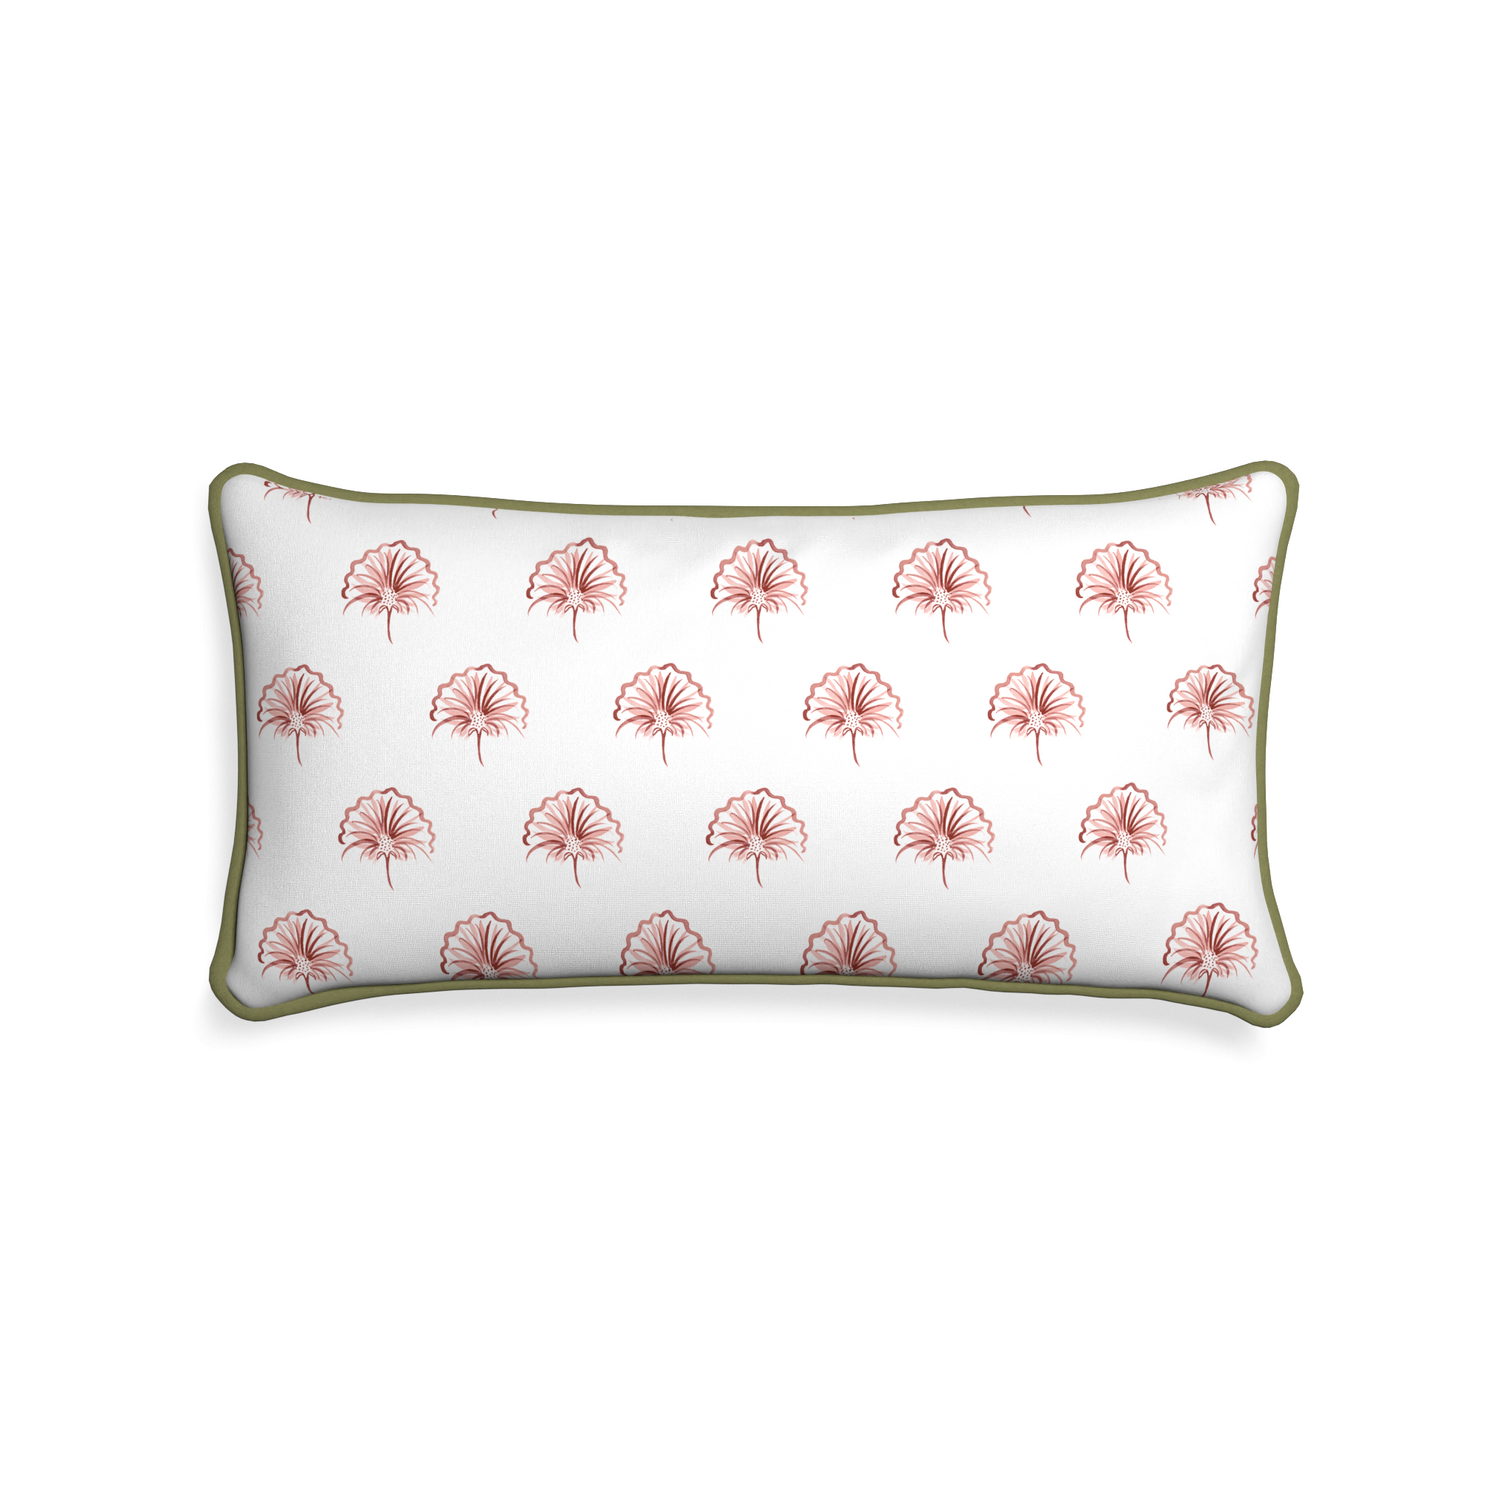 rectangle pink floral pillow with moss green piping